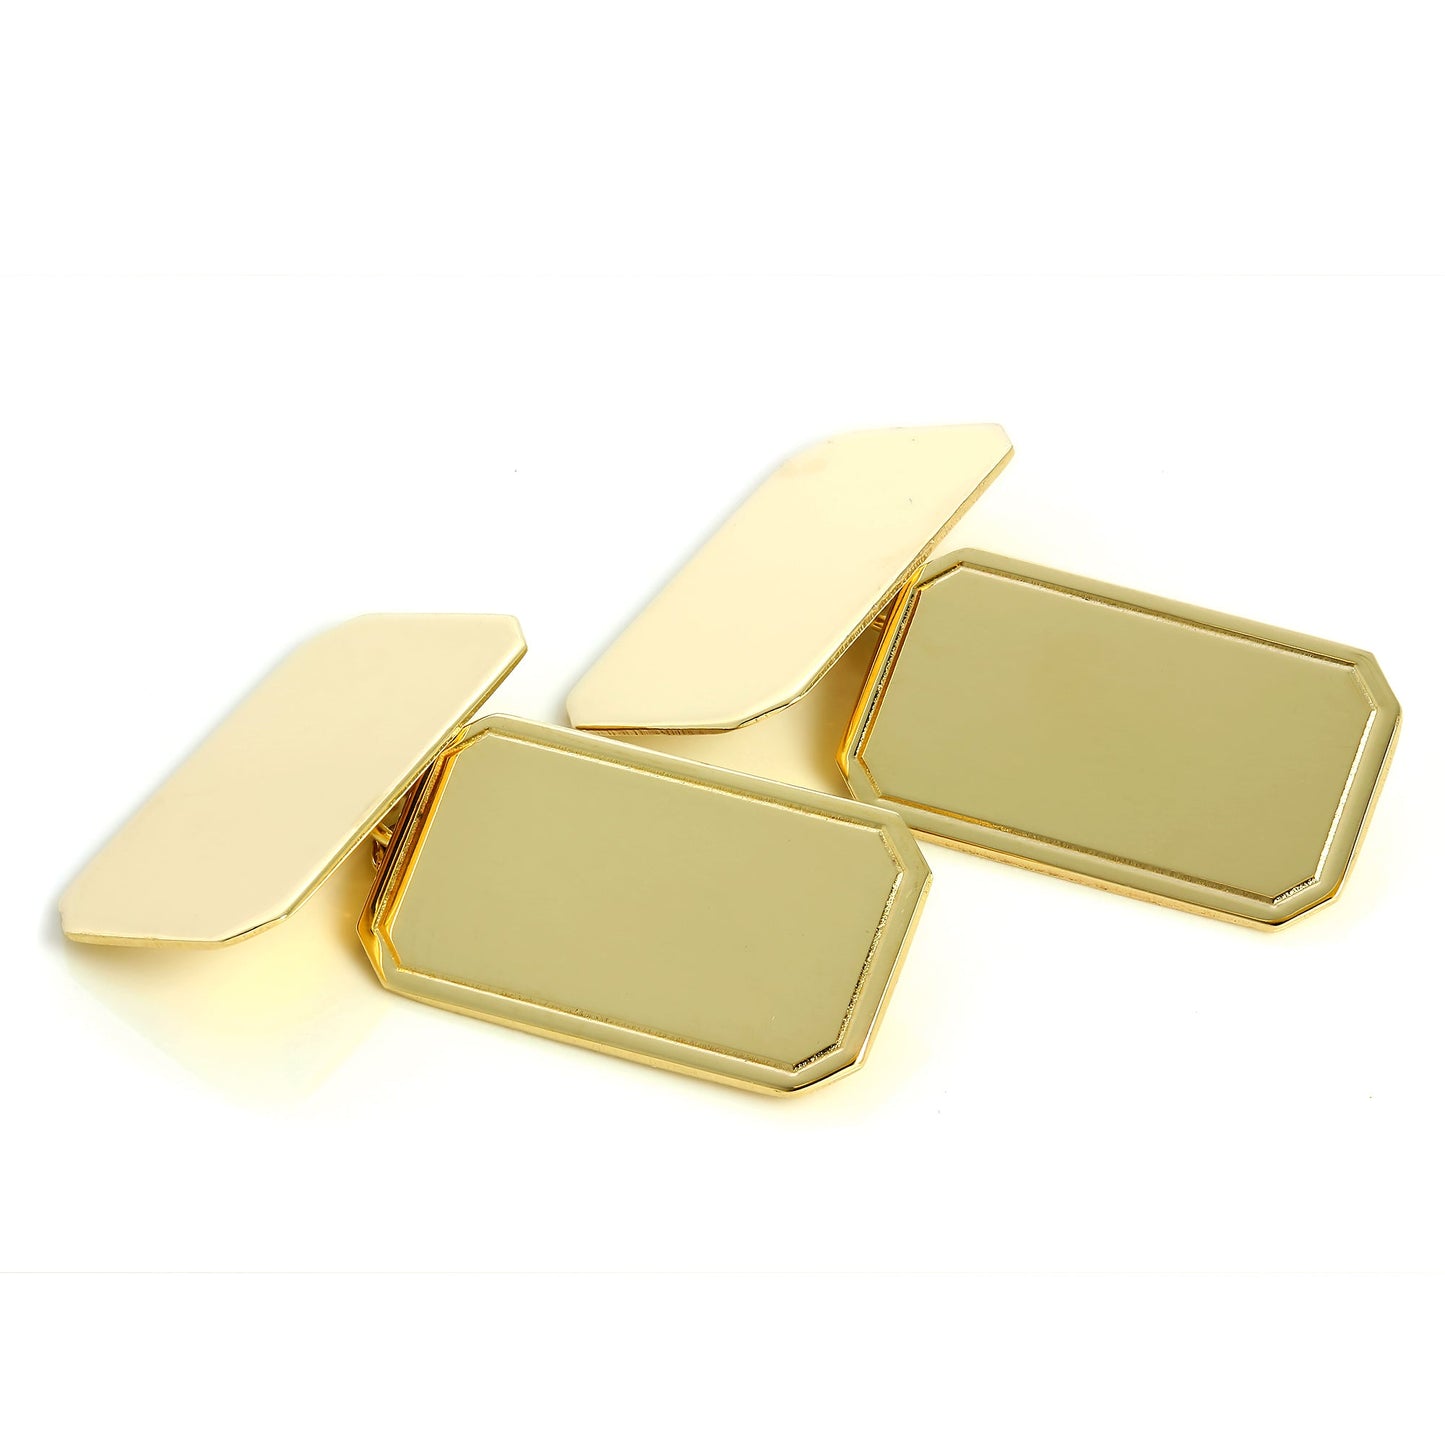 9ct Gold Engravable Edged Rectangular Double Sided Chain Cufflinks